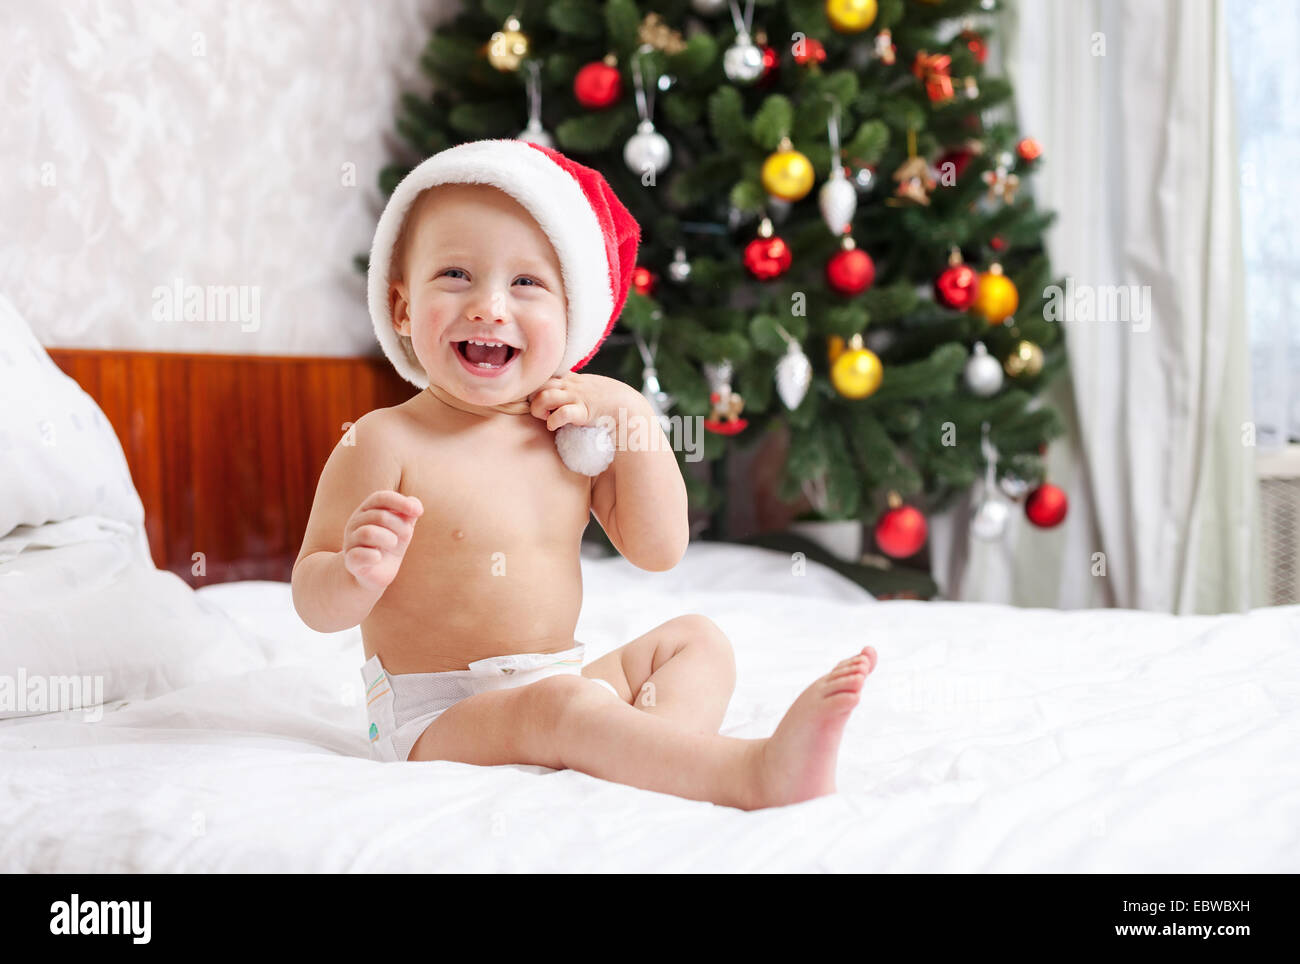 Christmas baby in santa hat sitting on bed and laughing Stock Photo